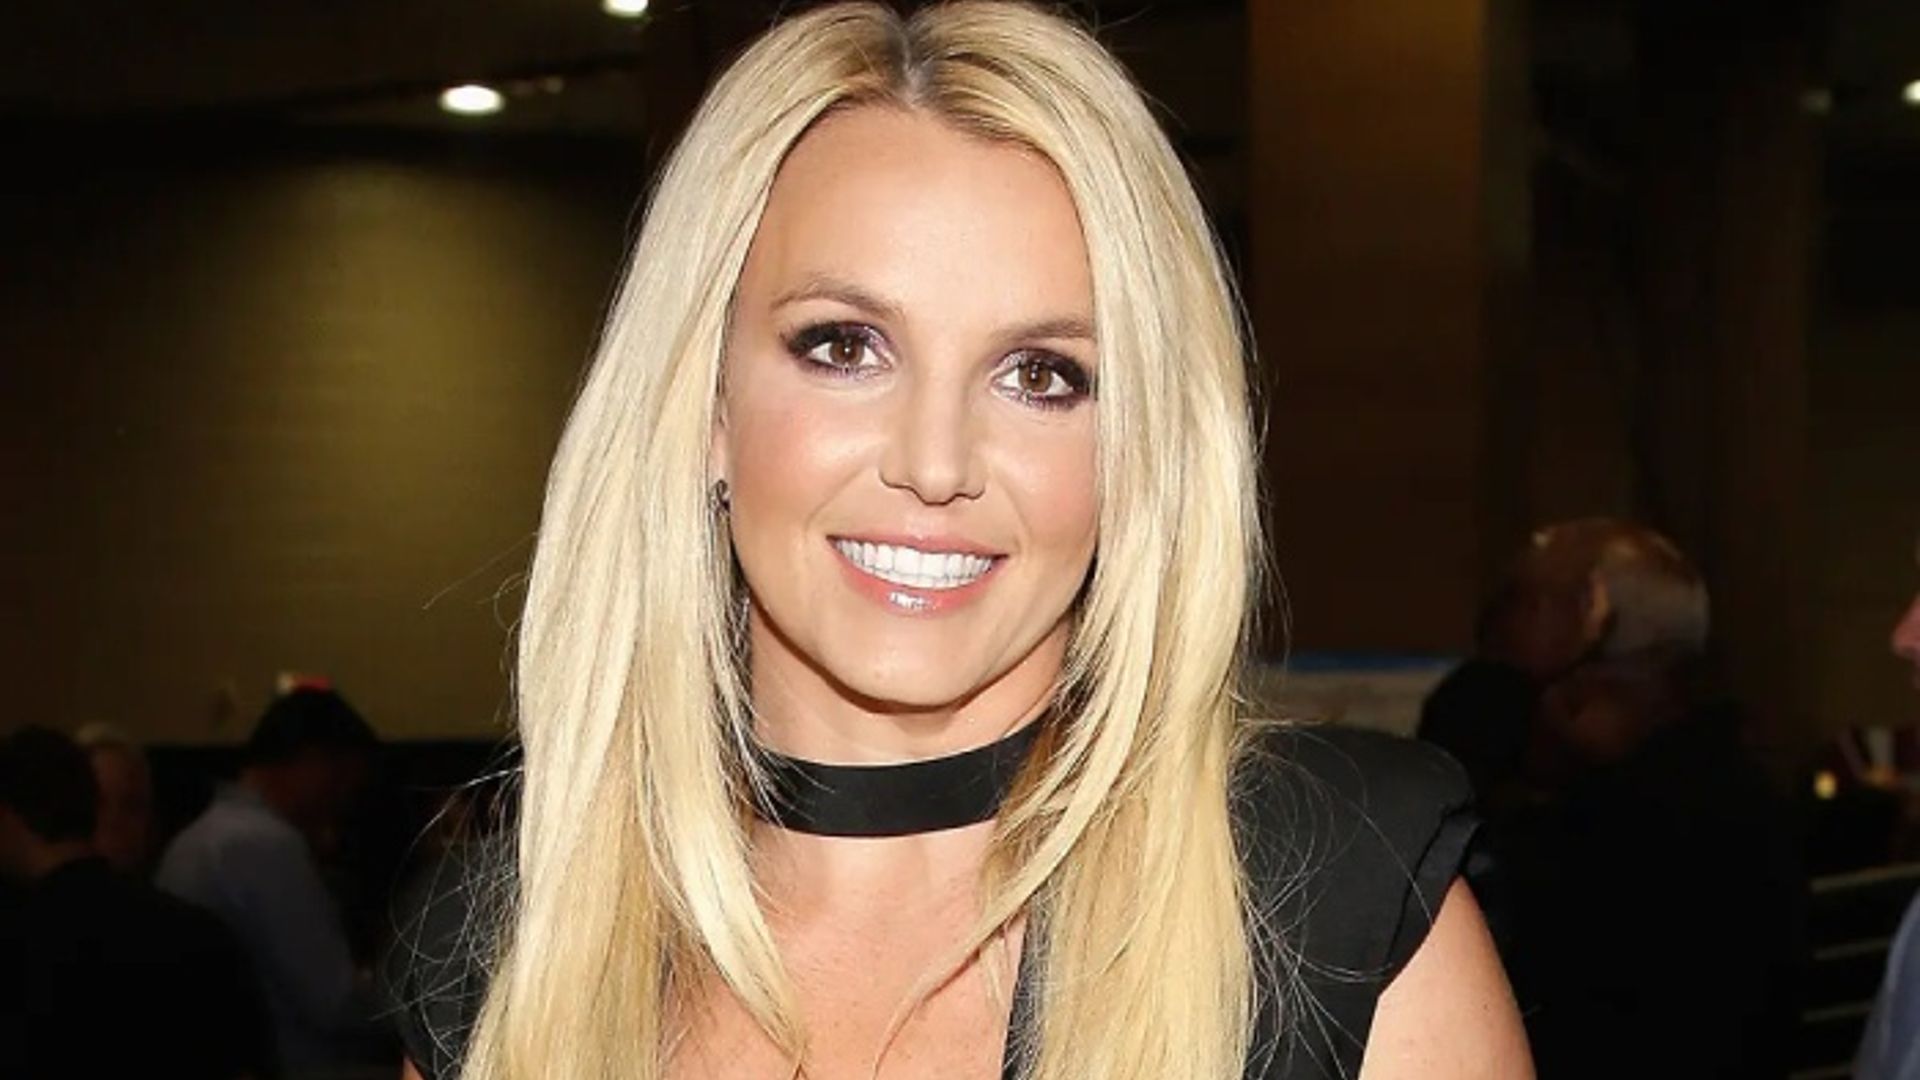 Britney Spears' father suspended from her conservatorship after 13 years